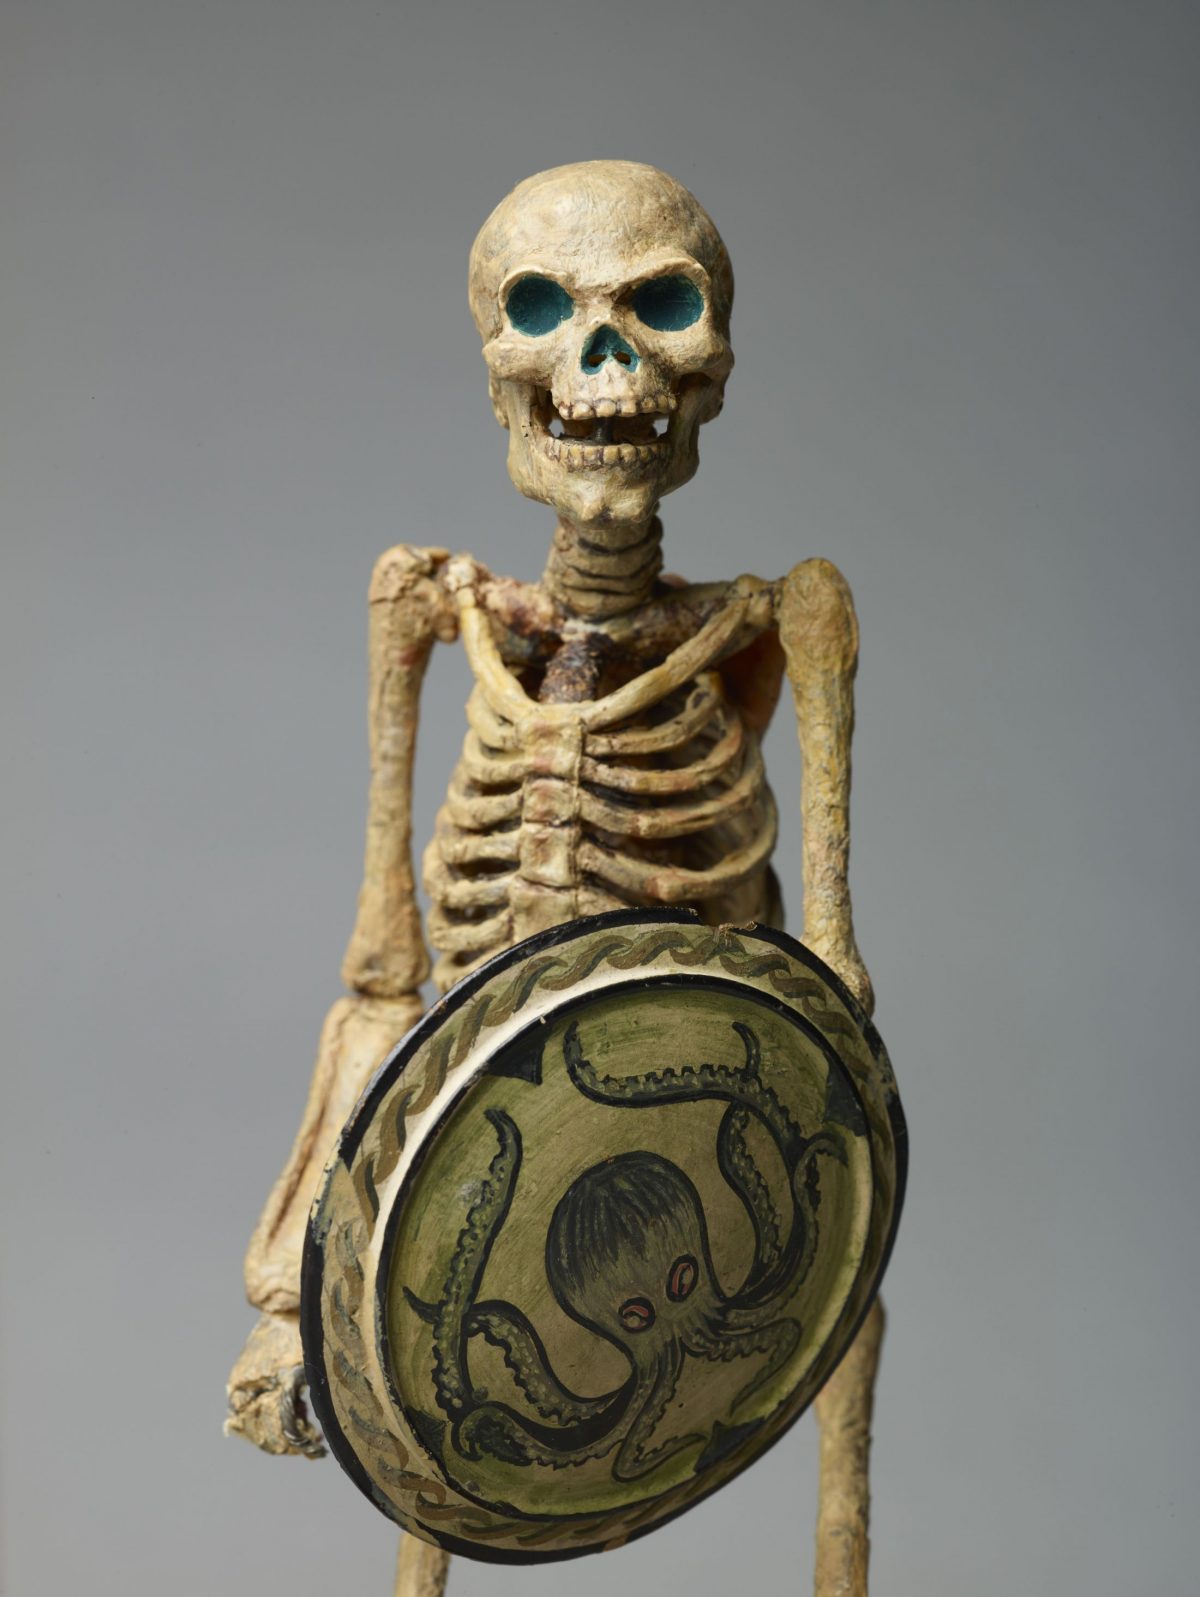 Original Skeleton model from Jason and the Argonauts, 1963; octopus shield by Ray Harryhausen (1920-2013), armature by Fred Harryhausen, c.1962 Collection: The Ray and Diana Harryhausen Foundation (Charity No. SC001419) © The Ray and Diana Harryhausen Foundation Photography: Sam Drake (National Galleries of Scotland)